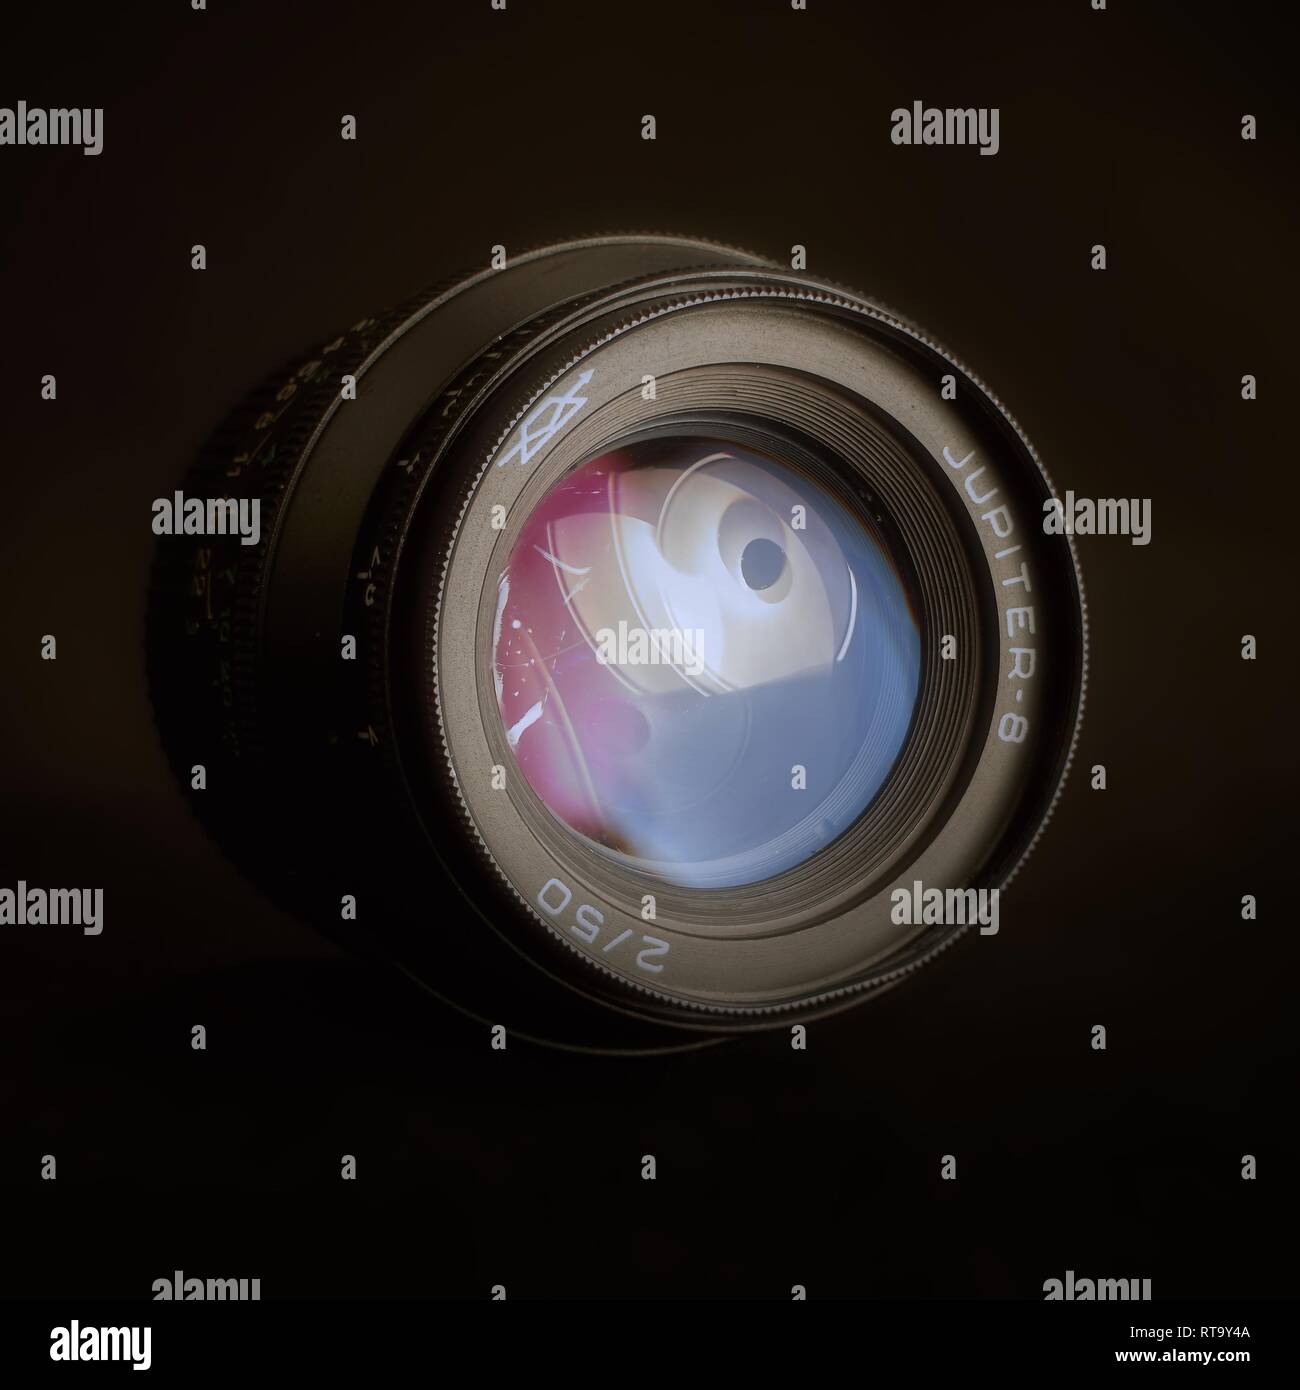 Essex, UK - 2/28/2019 : Russian manufactured Jupiter 8 50mm lens with a Leica M39 mount against a dark background. Stock Photo